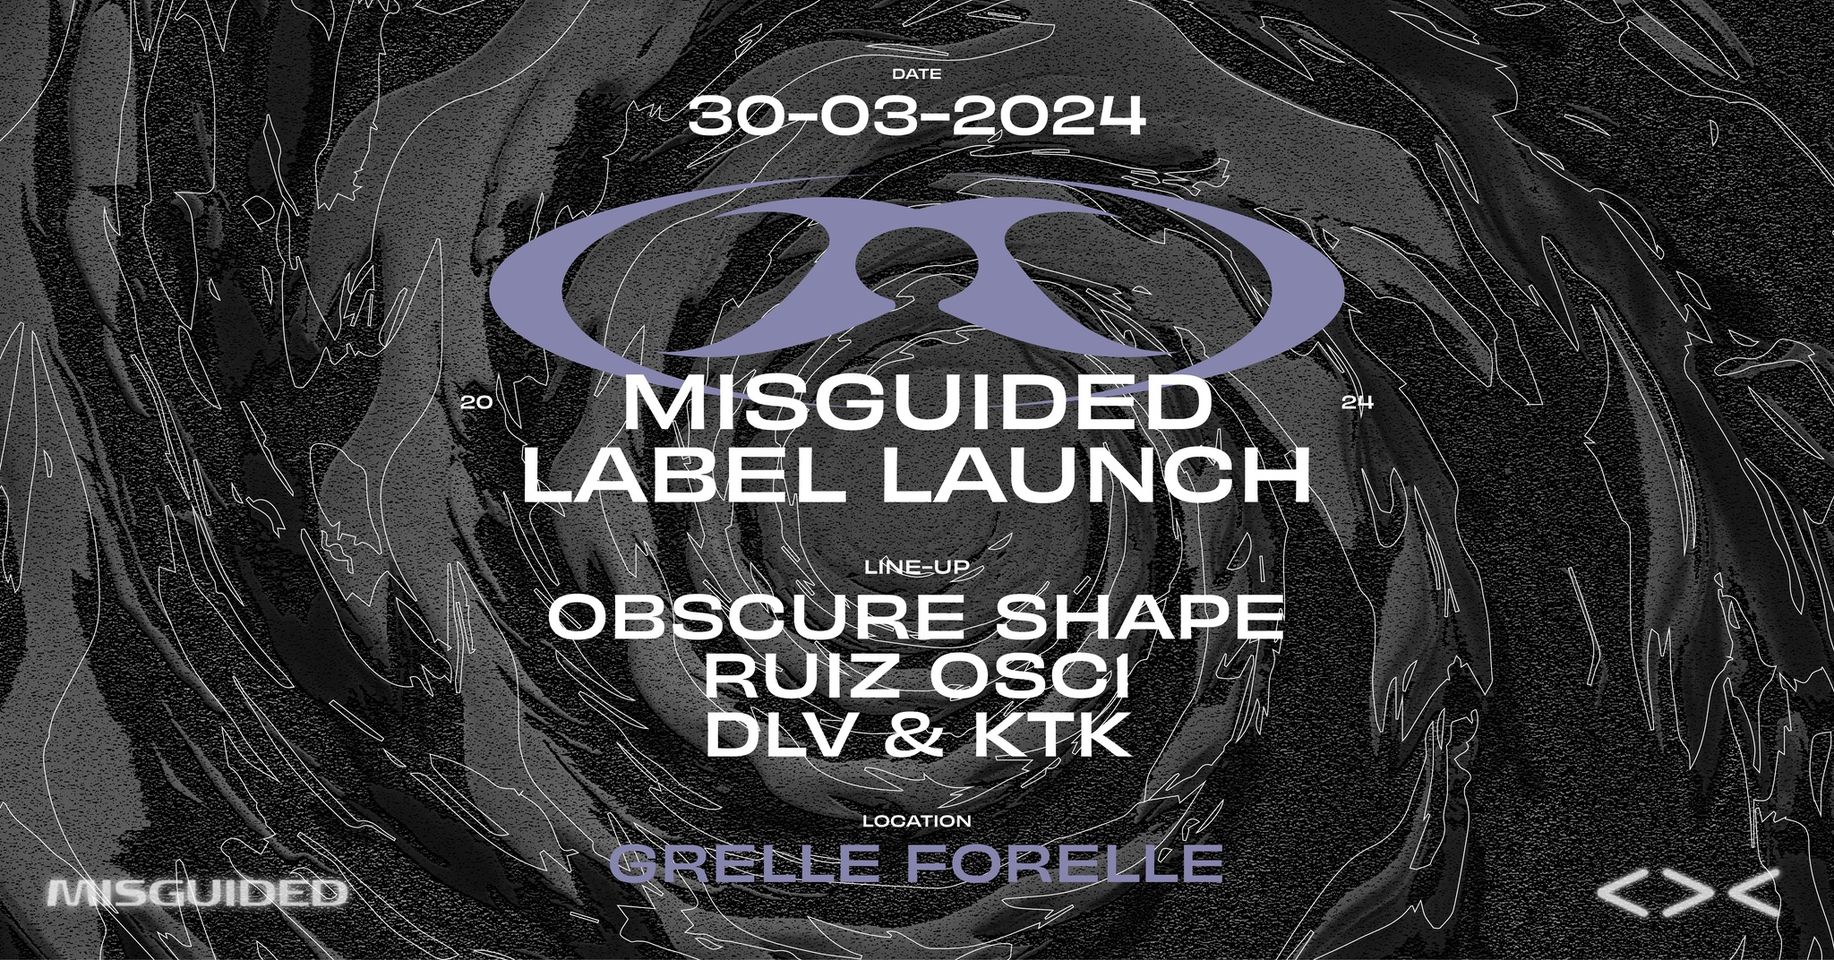 DLV pres. MISGUIDED am 30. March 2024 @ Grelle Forelle.